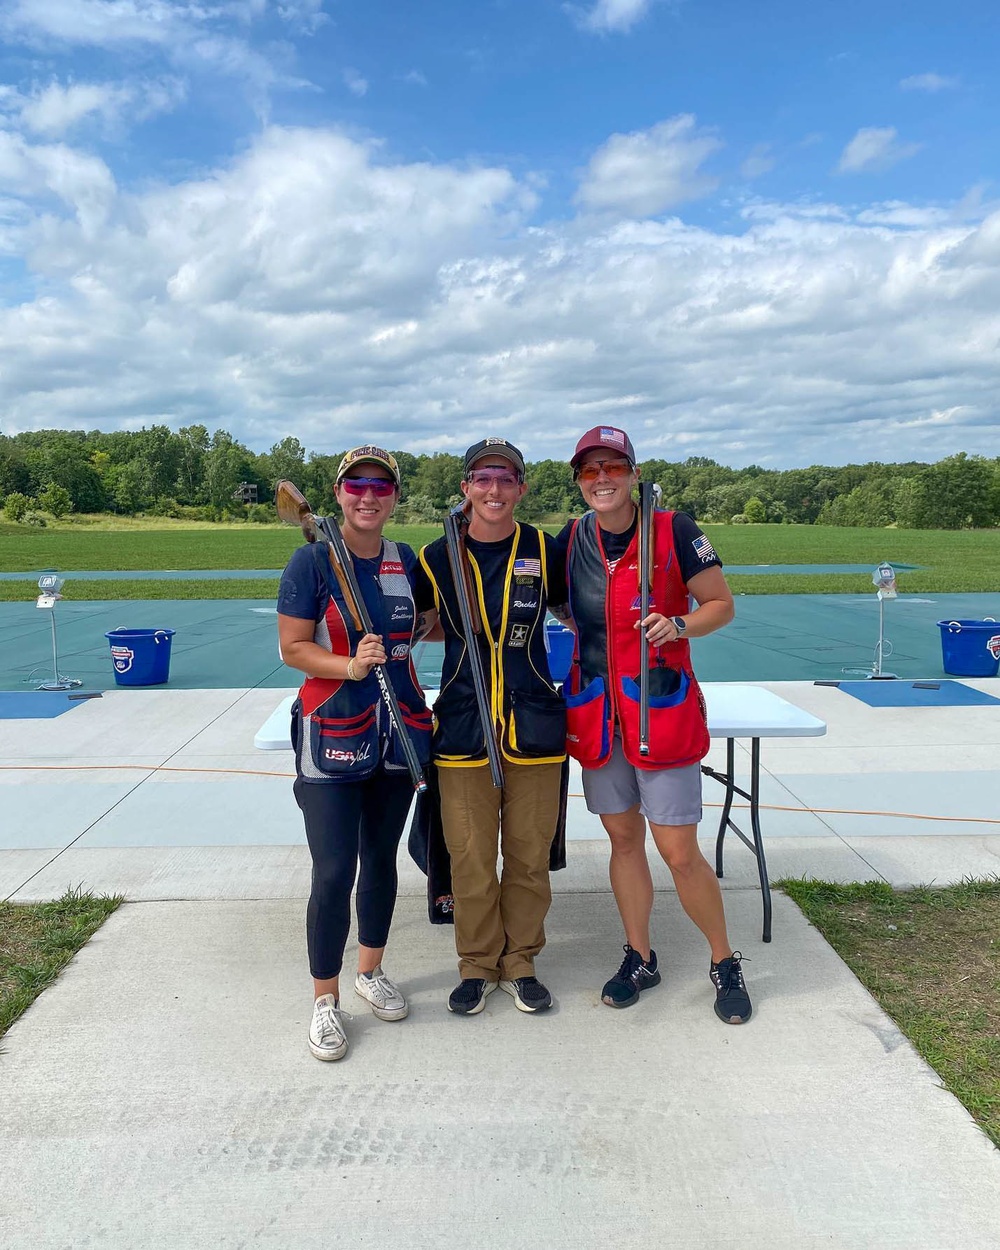 2020 Olympic Alternate &amp; Fort Benning Soldier Earns a Spot on U.S. World Championship Trap Team